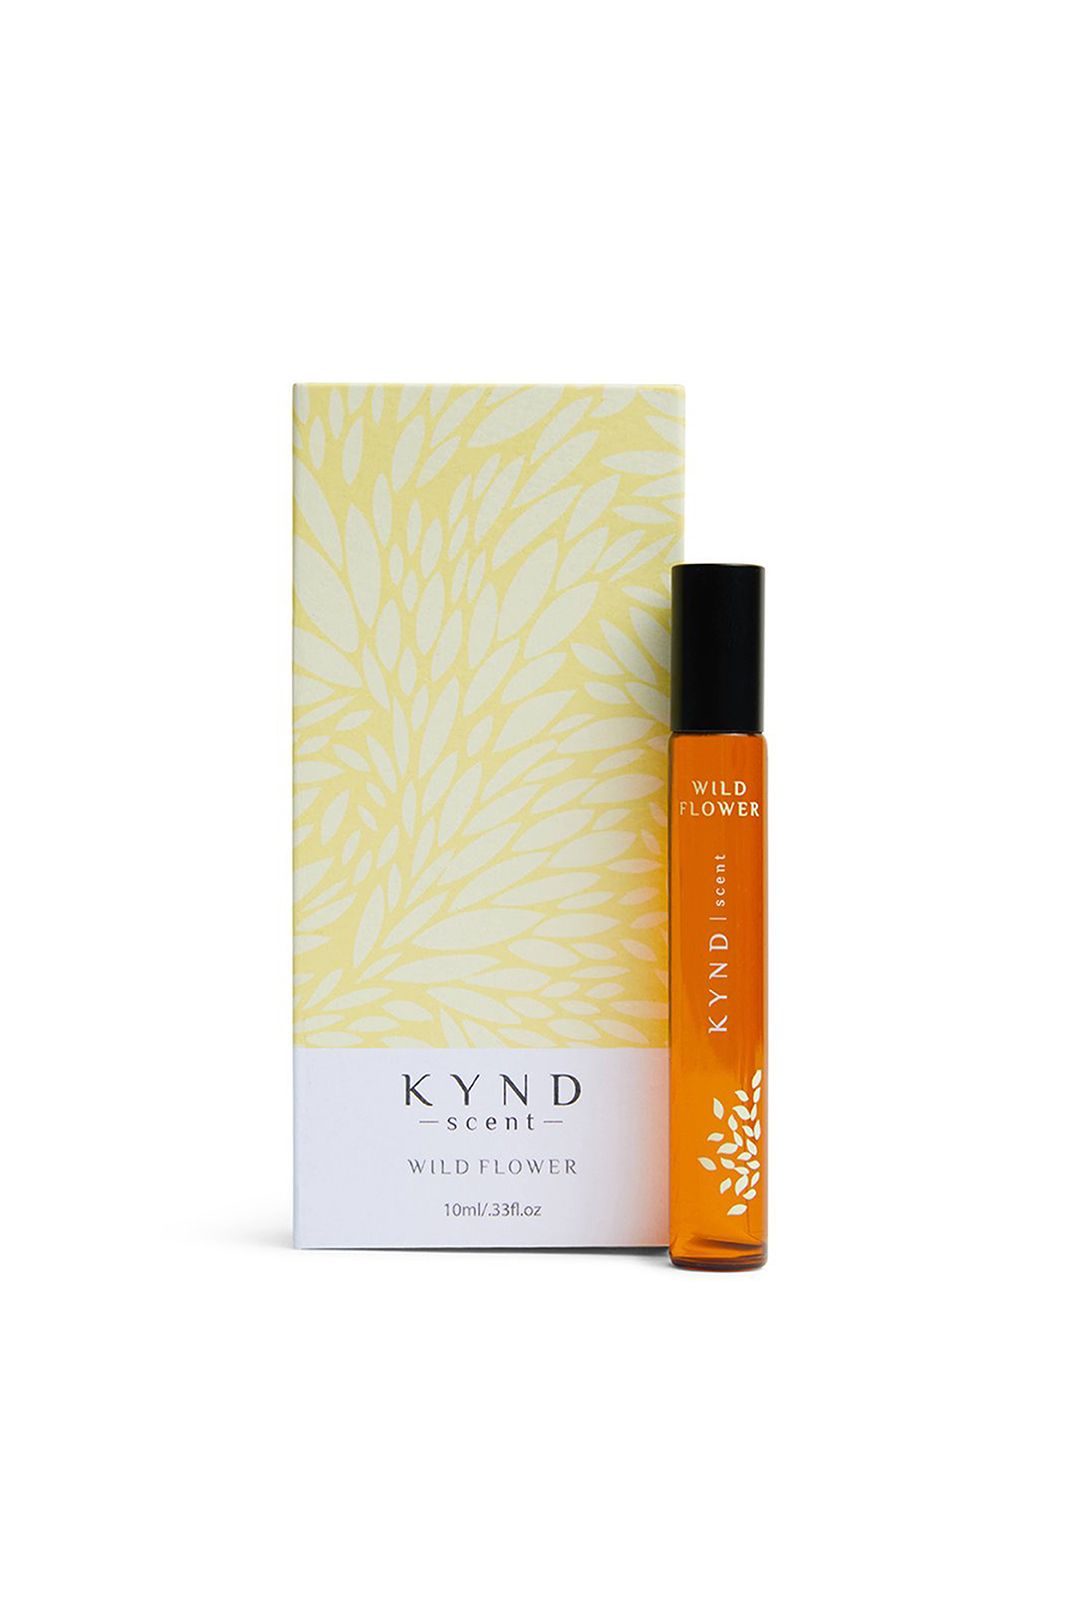 kynd-scent-wild-flower-product-1